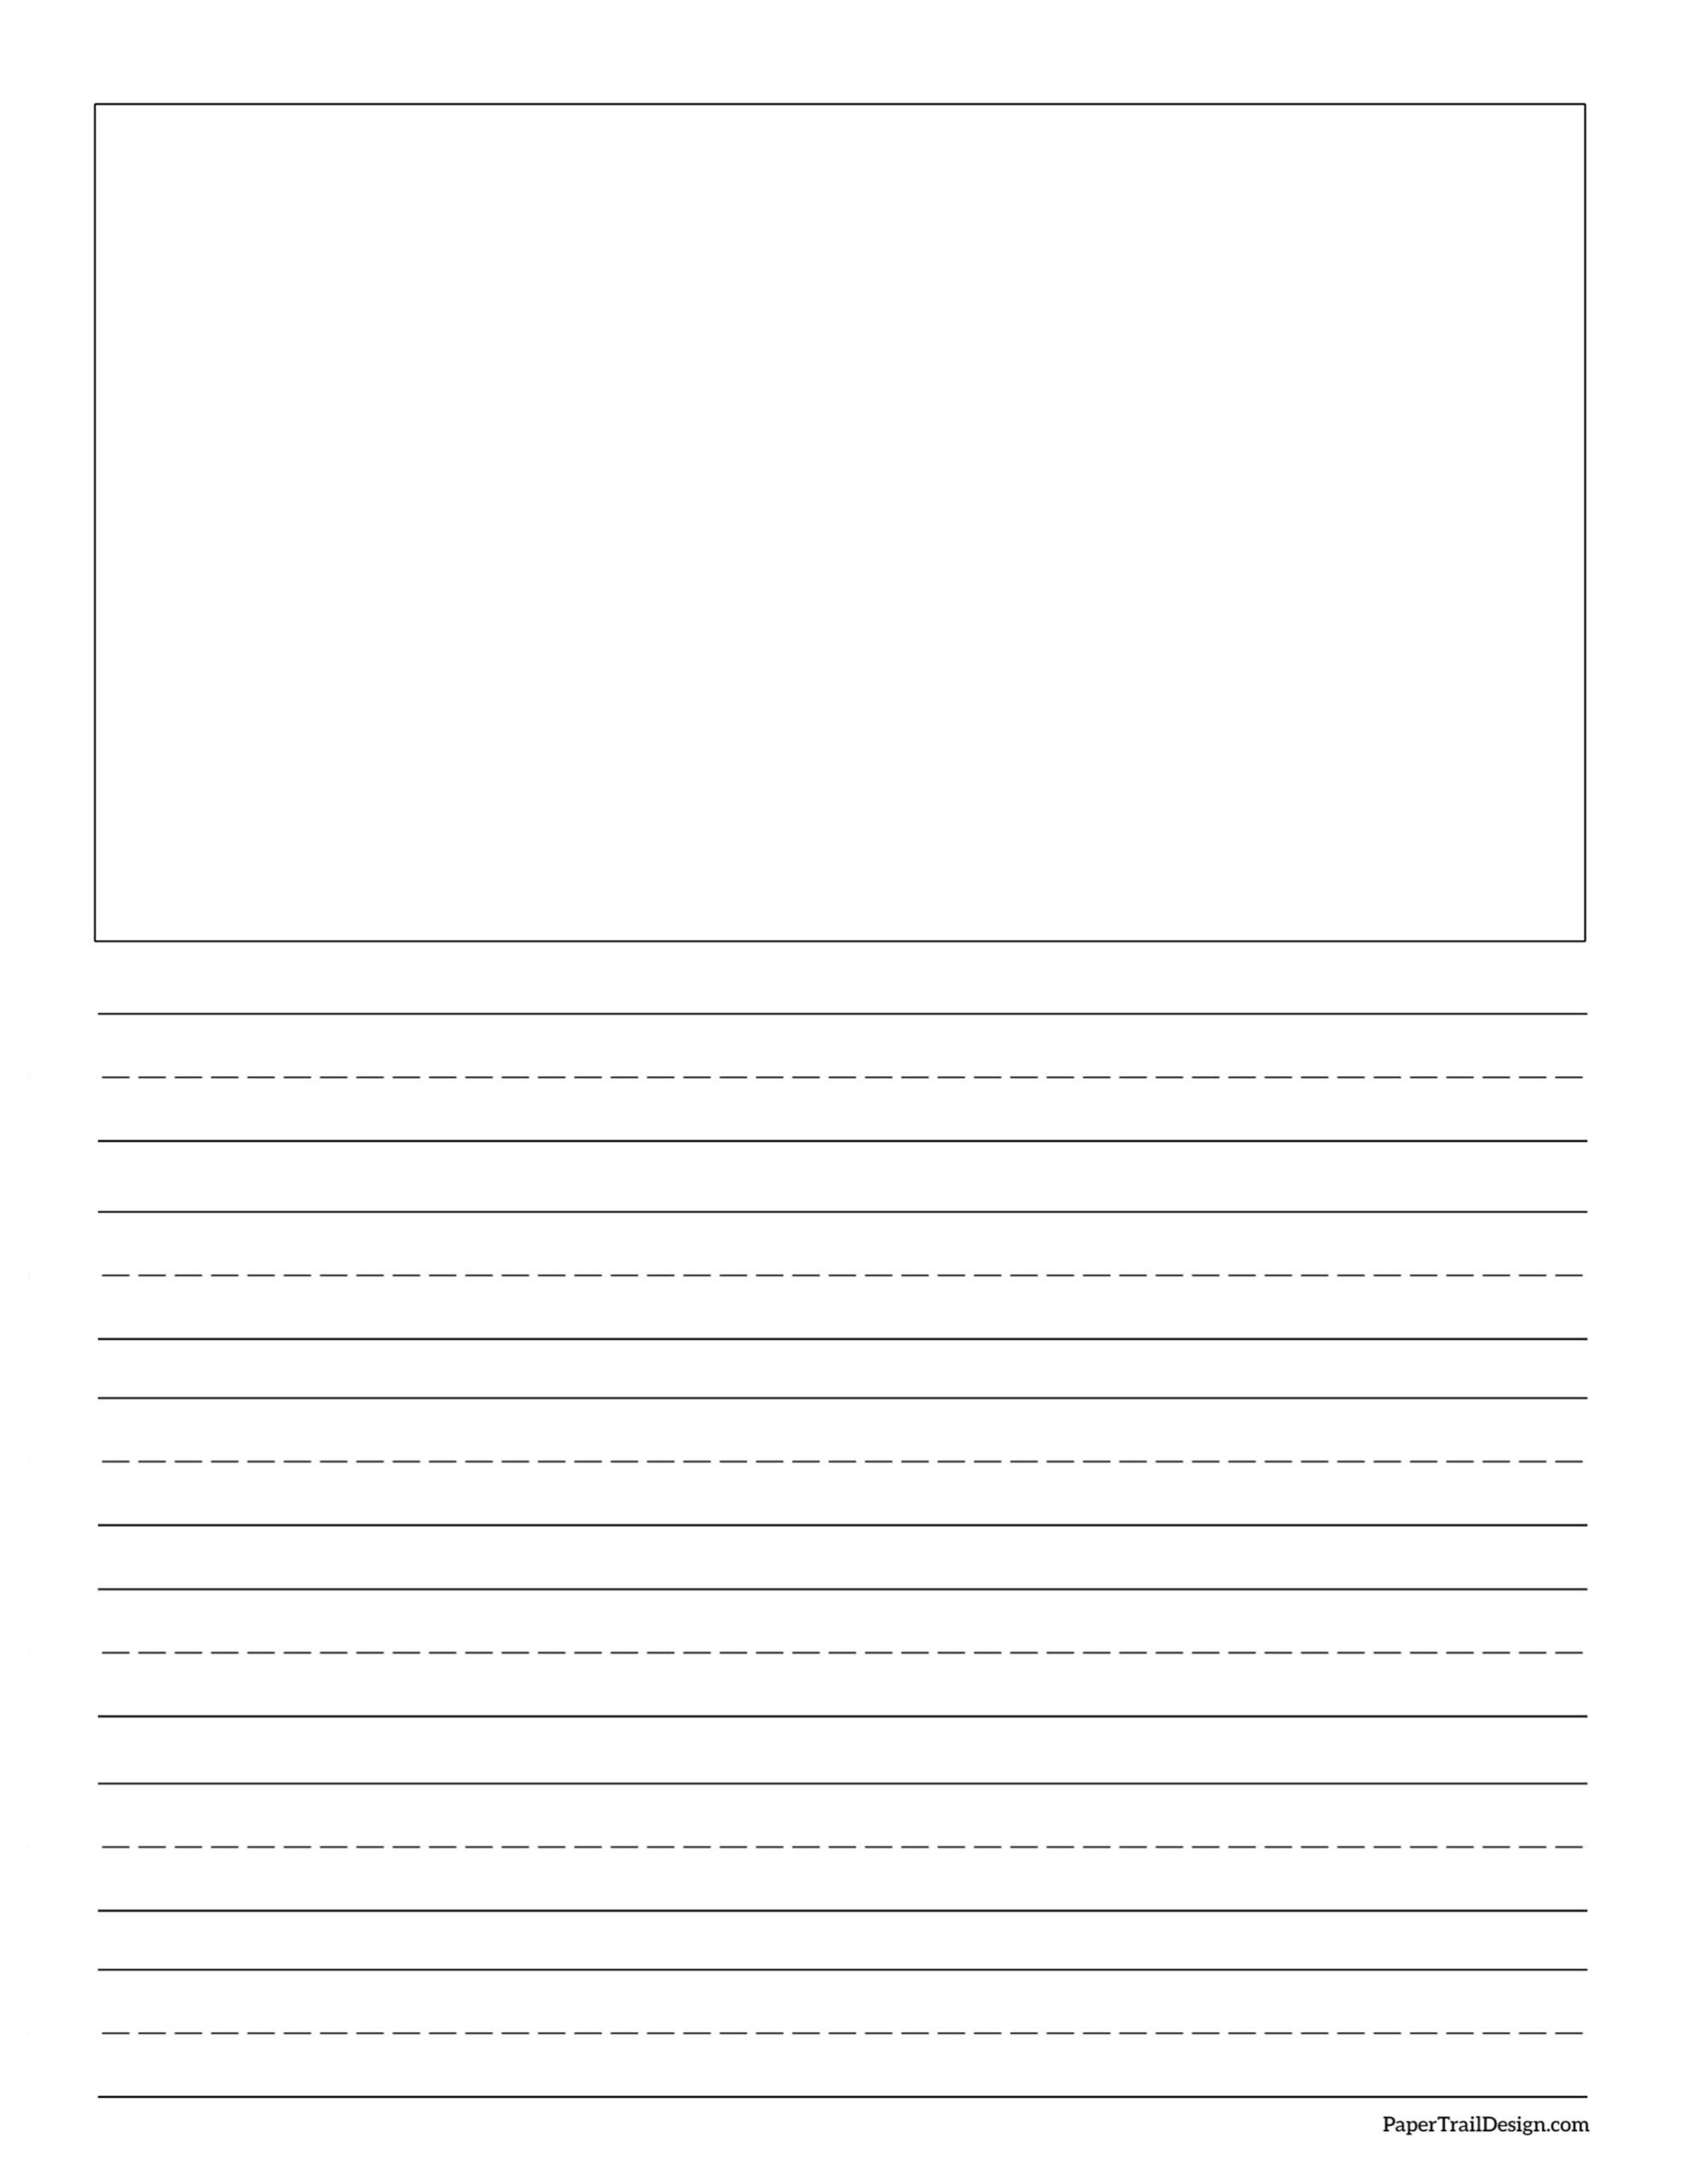 Lined Paper With Picture Box Primary Line Paper